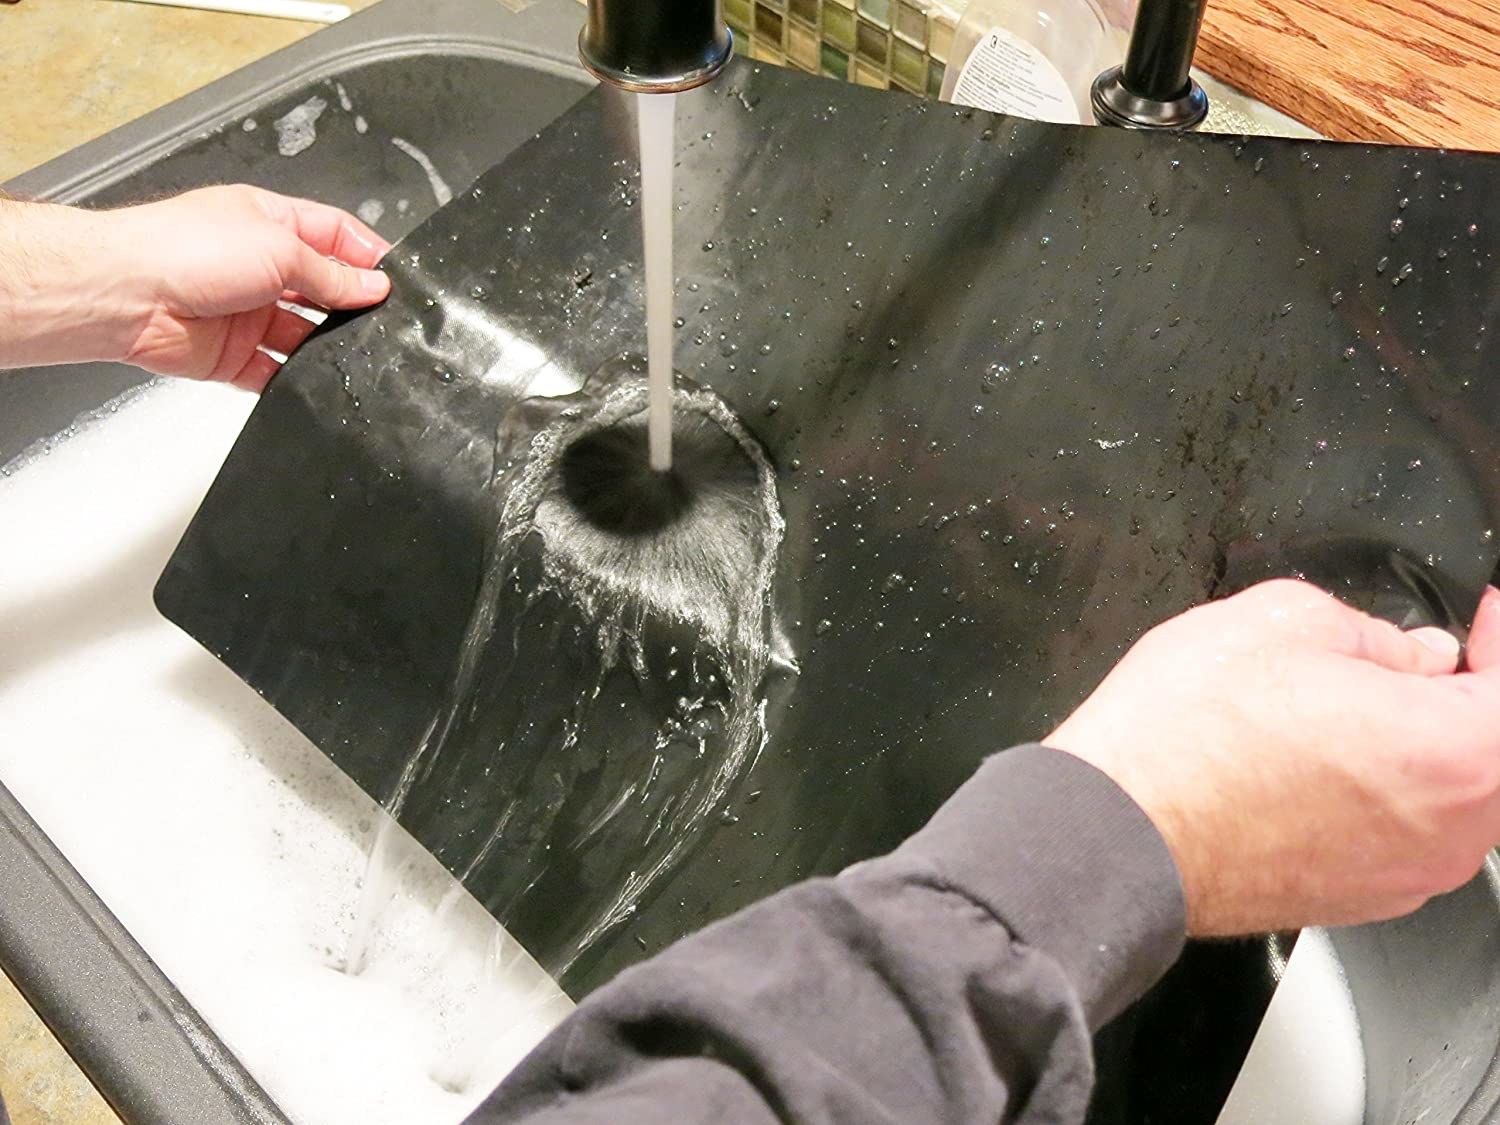 a person rinsing the oven liner under a running faucet